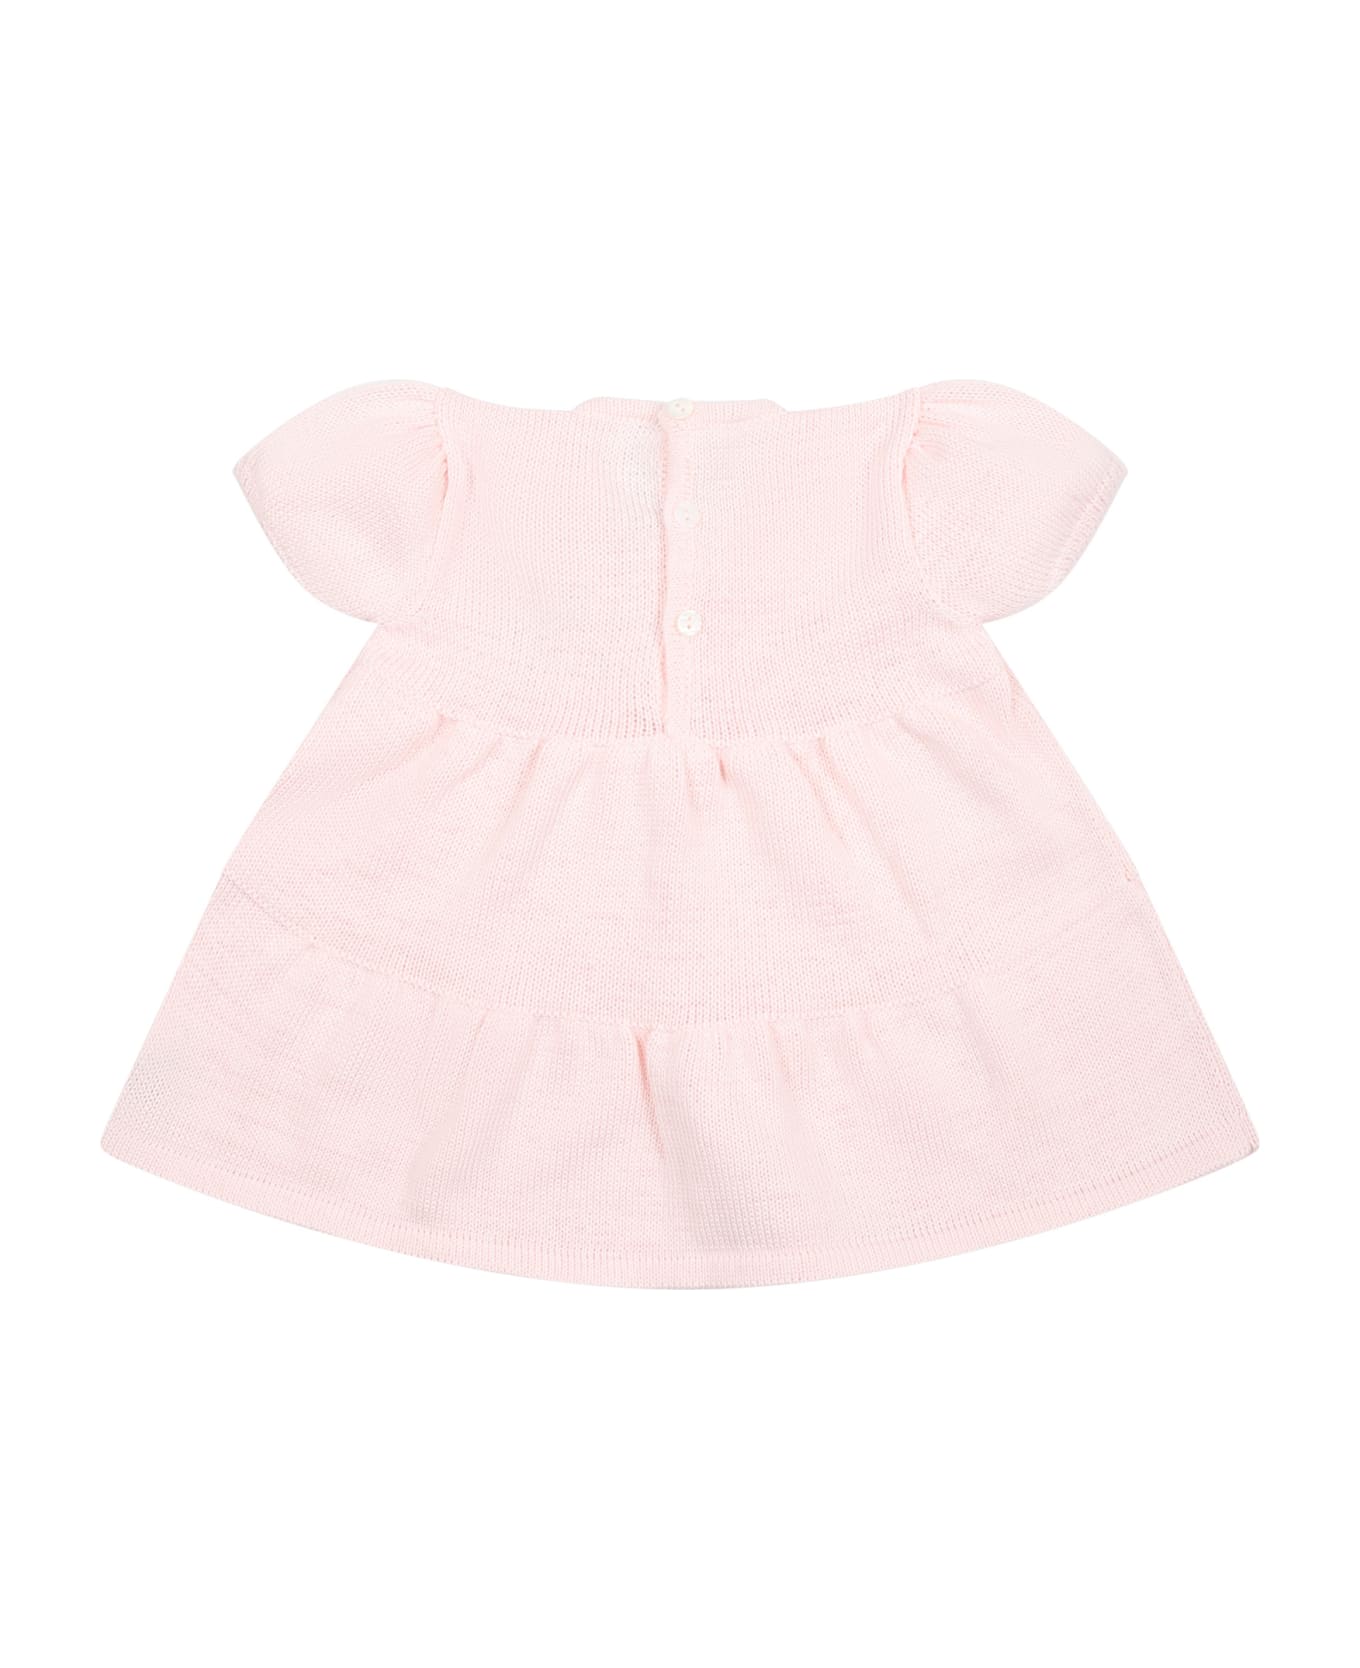 Little Bear Pink Casual Dress For Baby Girl - Pink